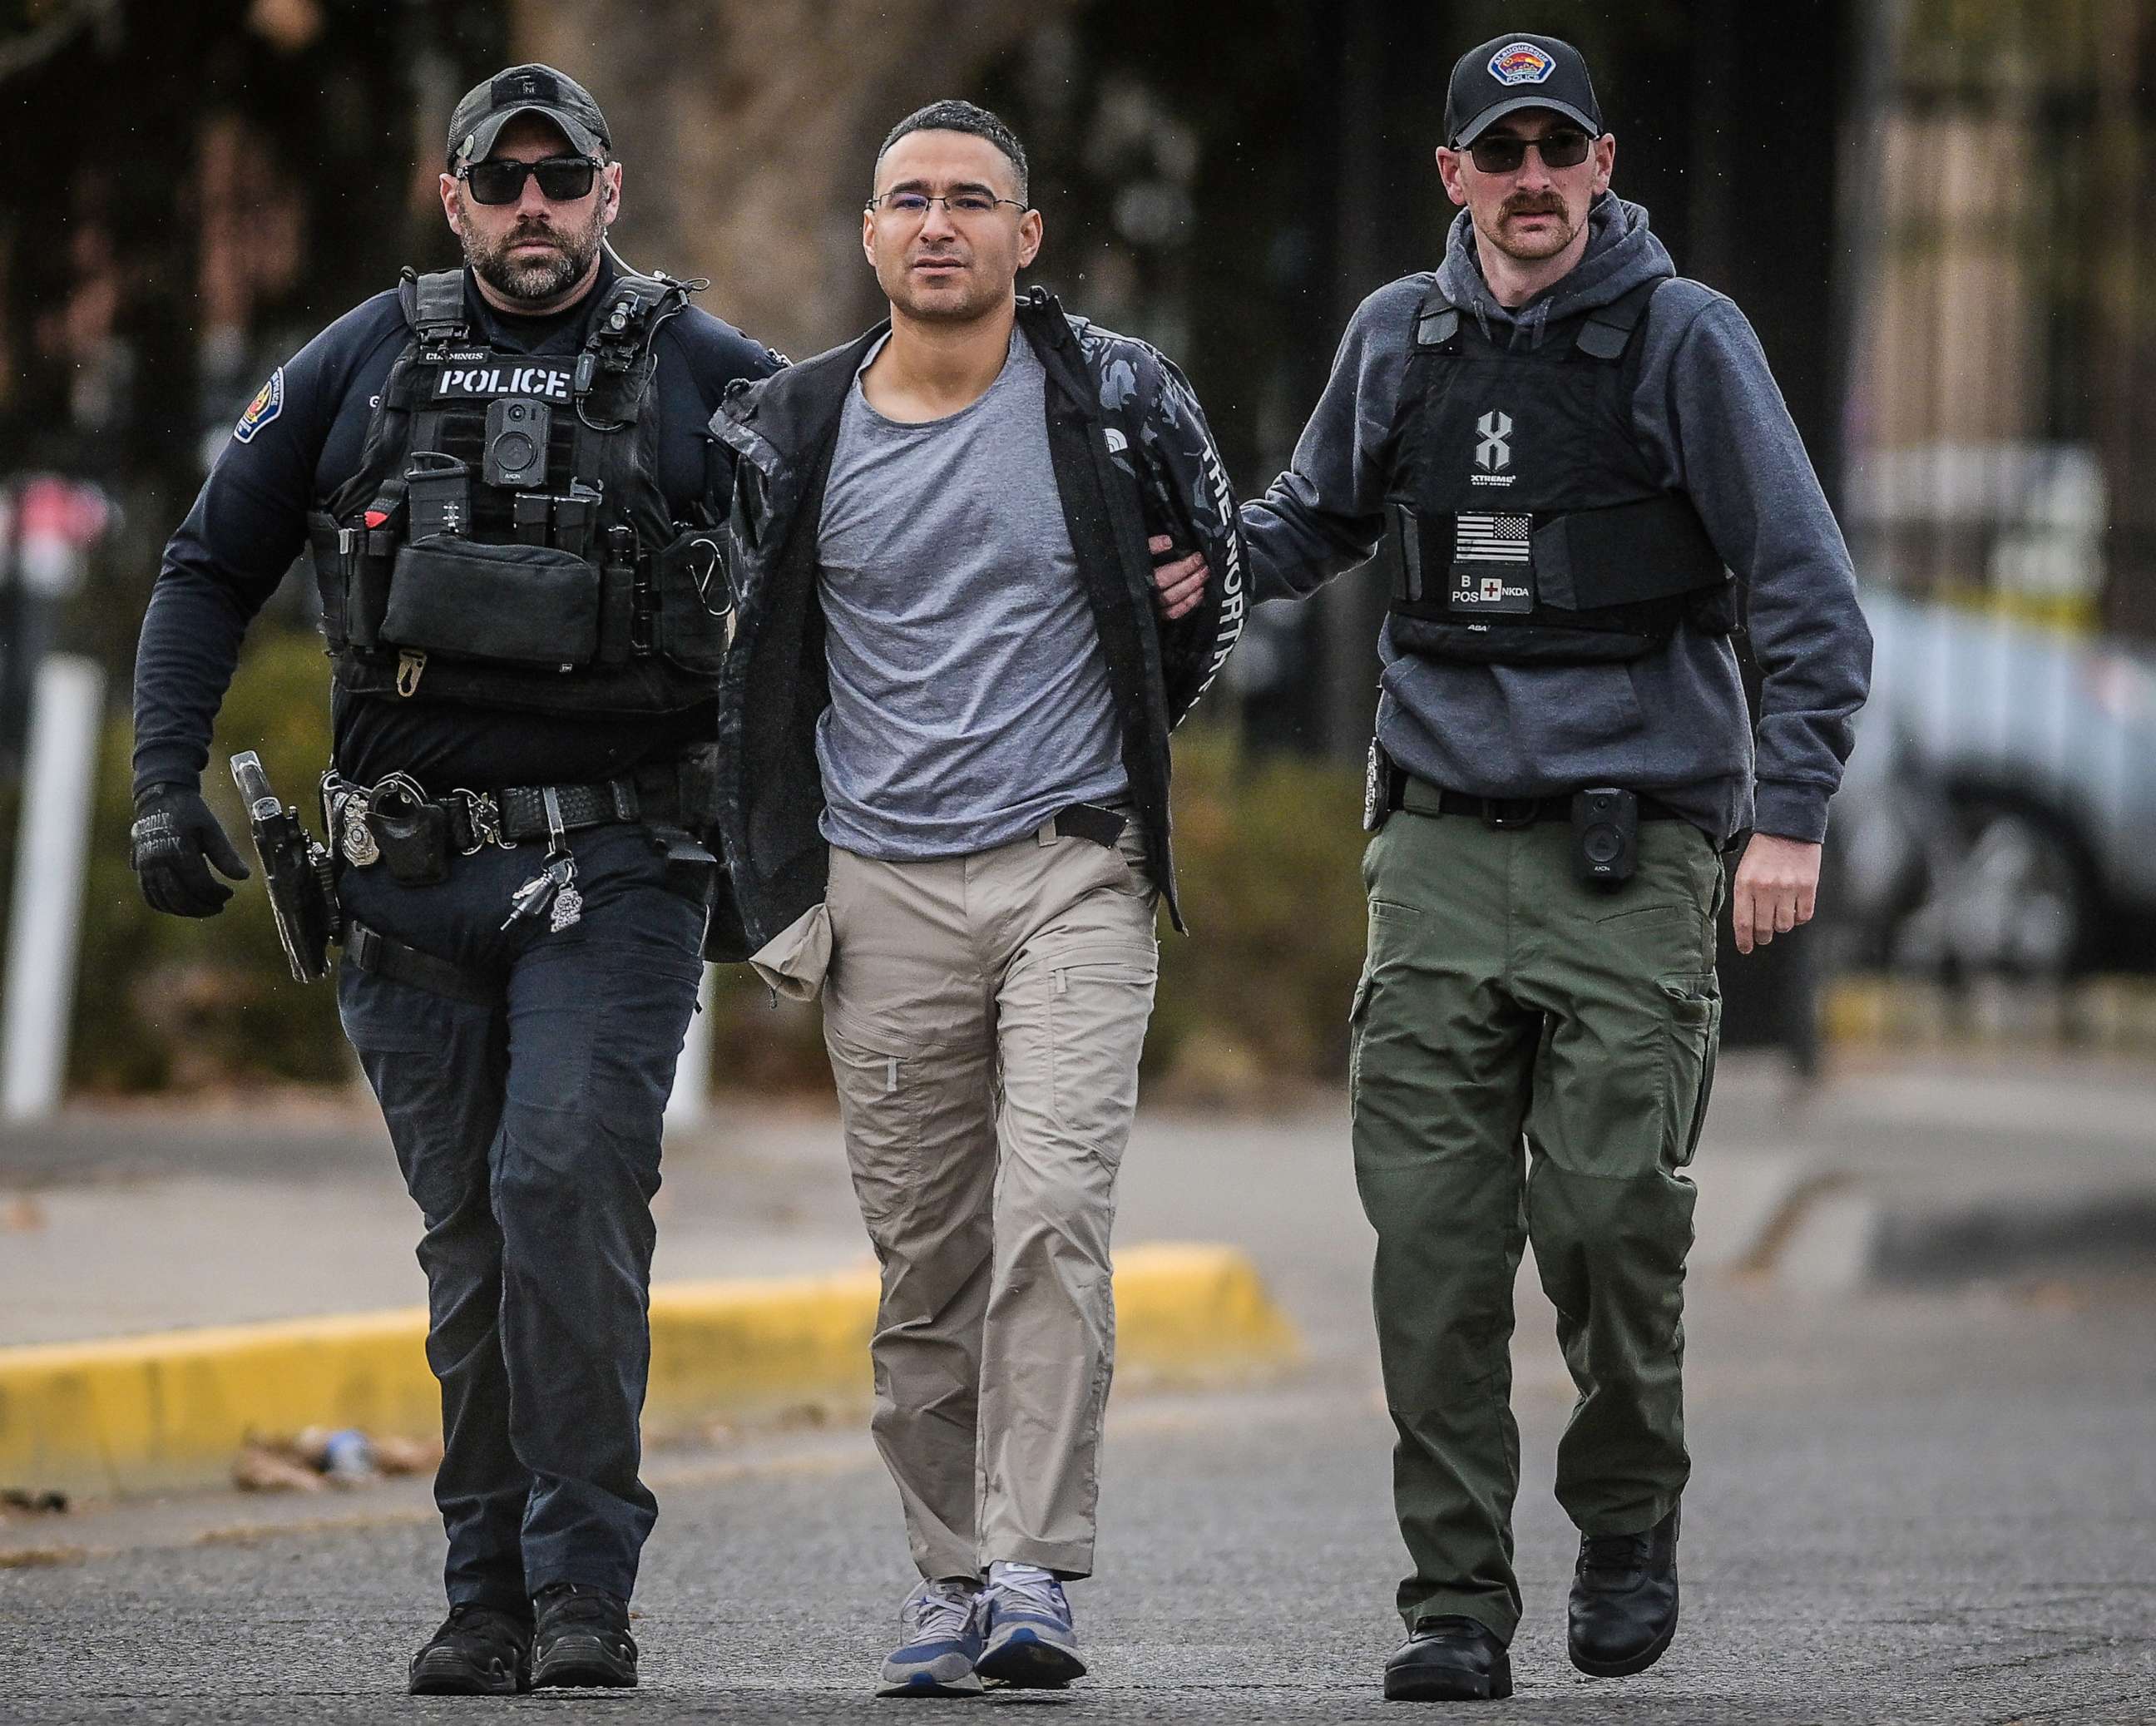 PHOTO: Solomon Peña, Republican Candidate for New Mexico House District 14, being taken into custody by APD police officers in SW Albuquerque, N.M., on Jan. 16, 2023.